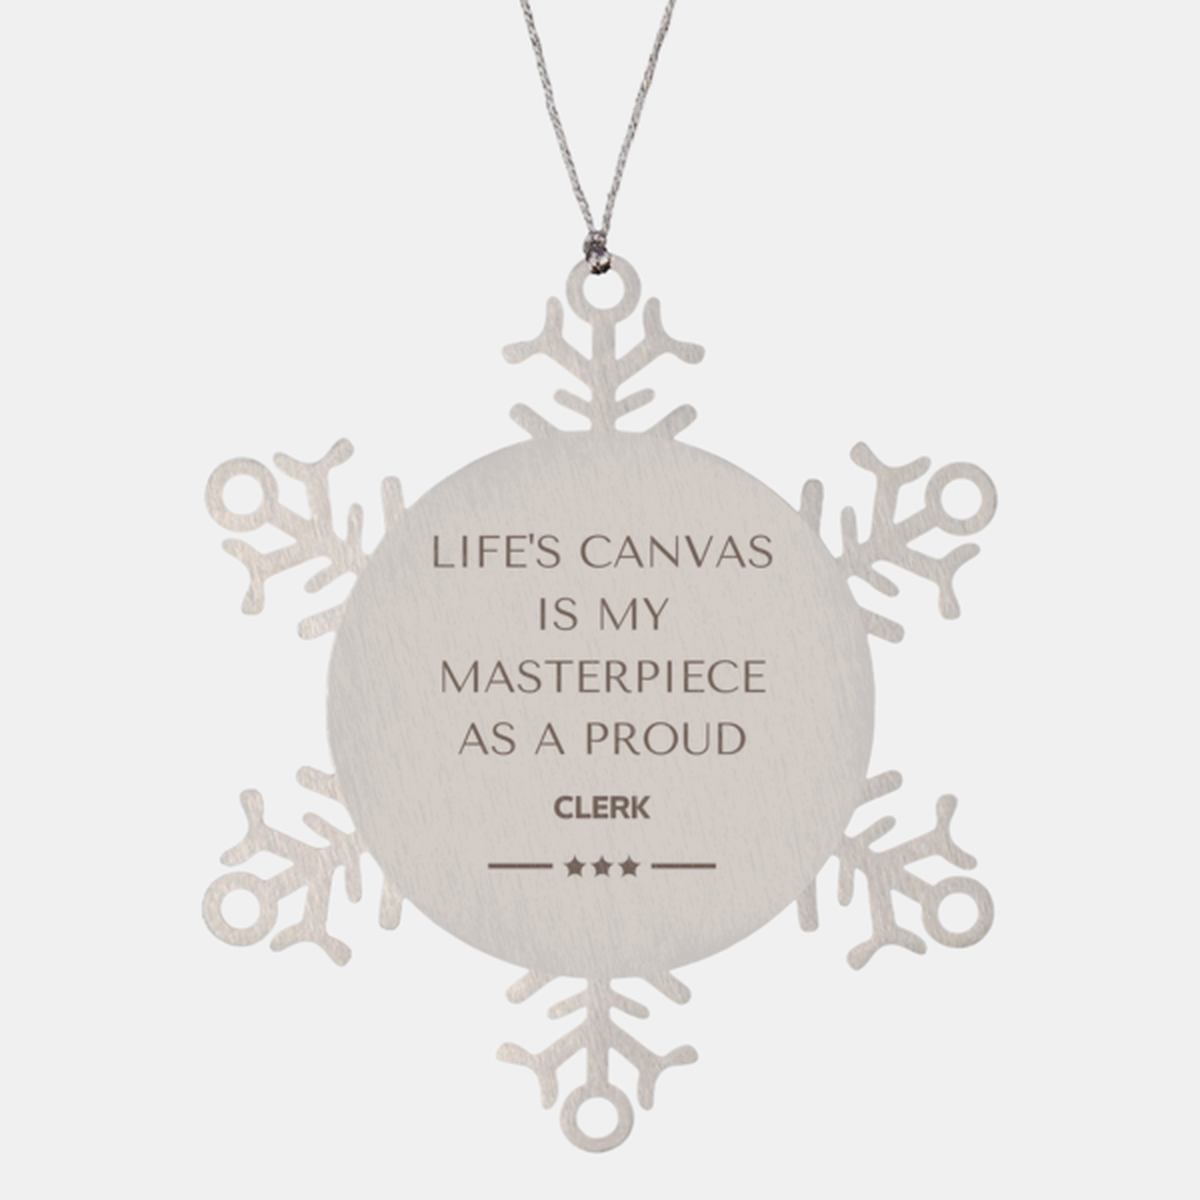 Proud Clerk Gifts, Life's canvas is my masterpiece, Epic Birthday Christmas Unique Snowflake Ornament For Clerk, Coworkers, Men, Women, Friends